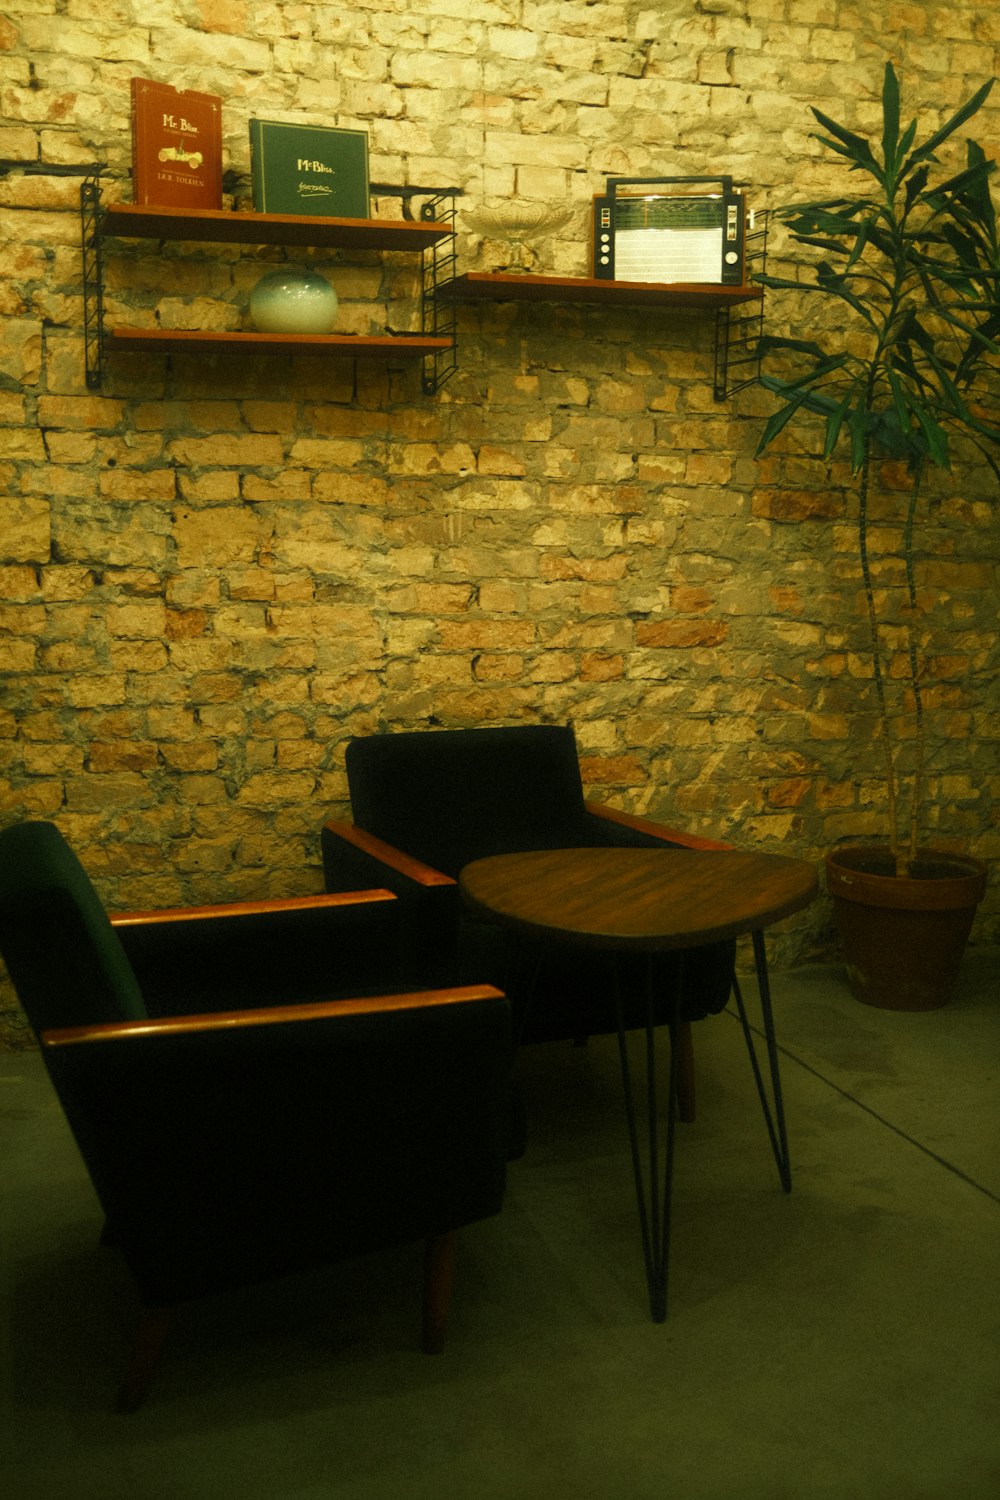 two chairs and a table in front of a brick wall